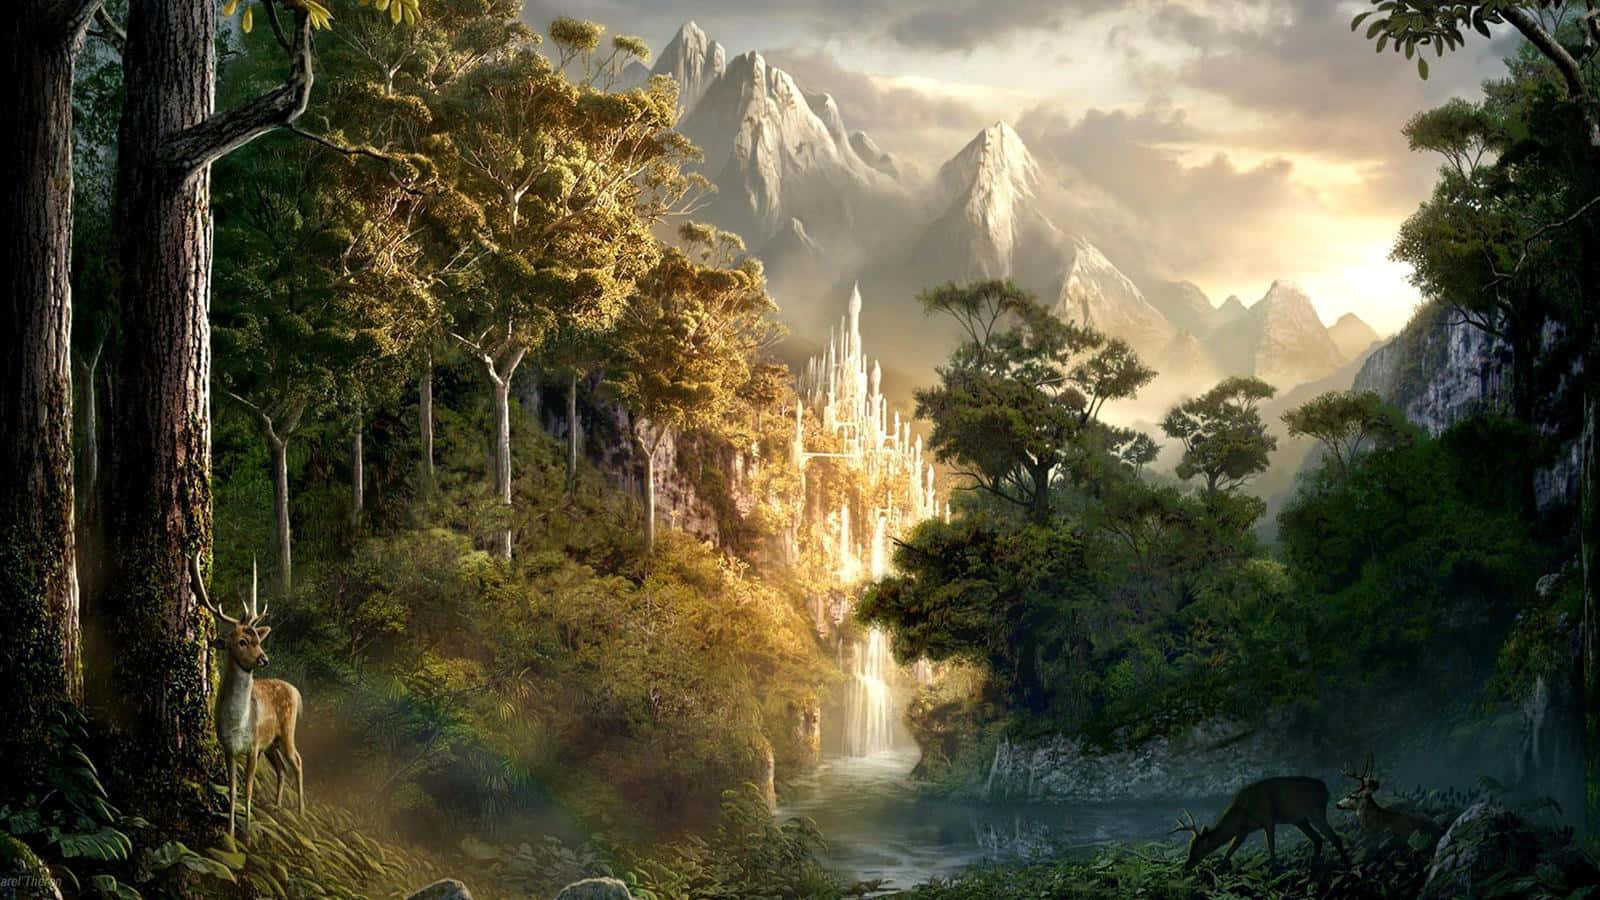 A Fantasy Landscape With A Waterfall And Trees